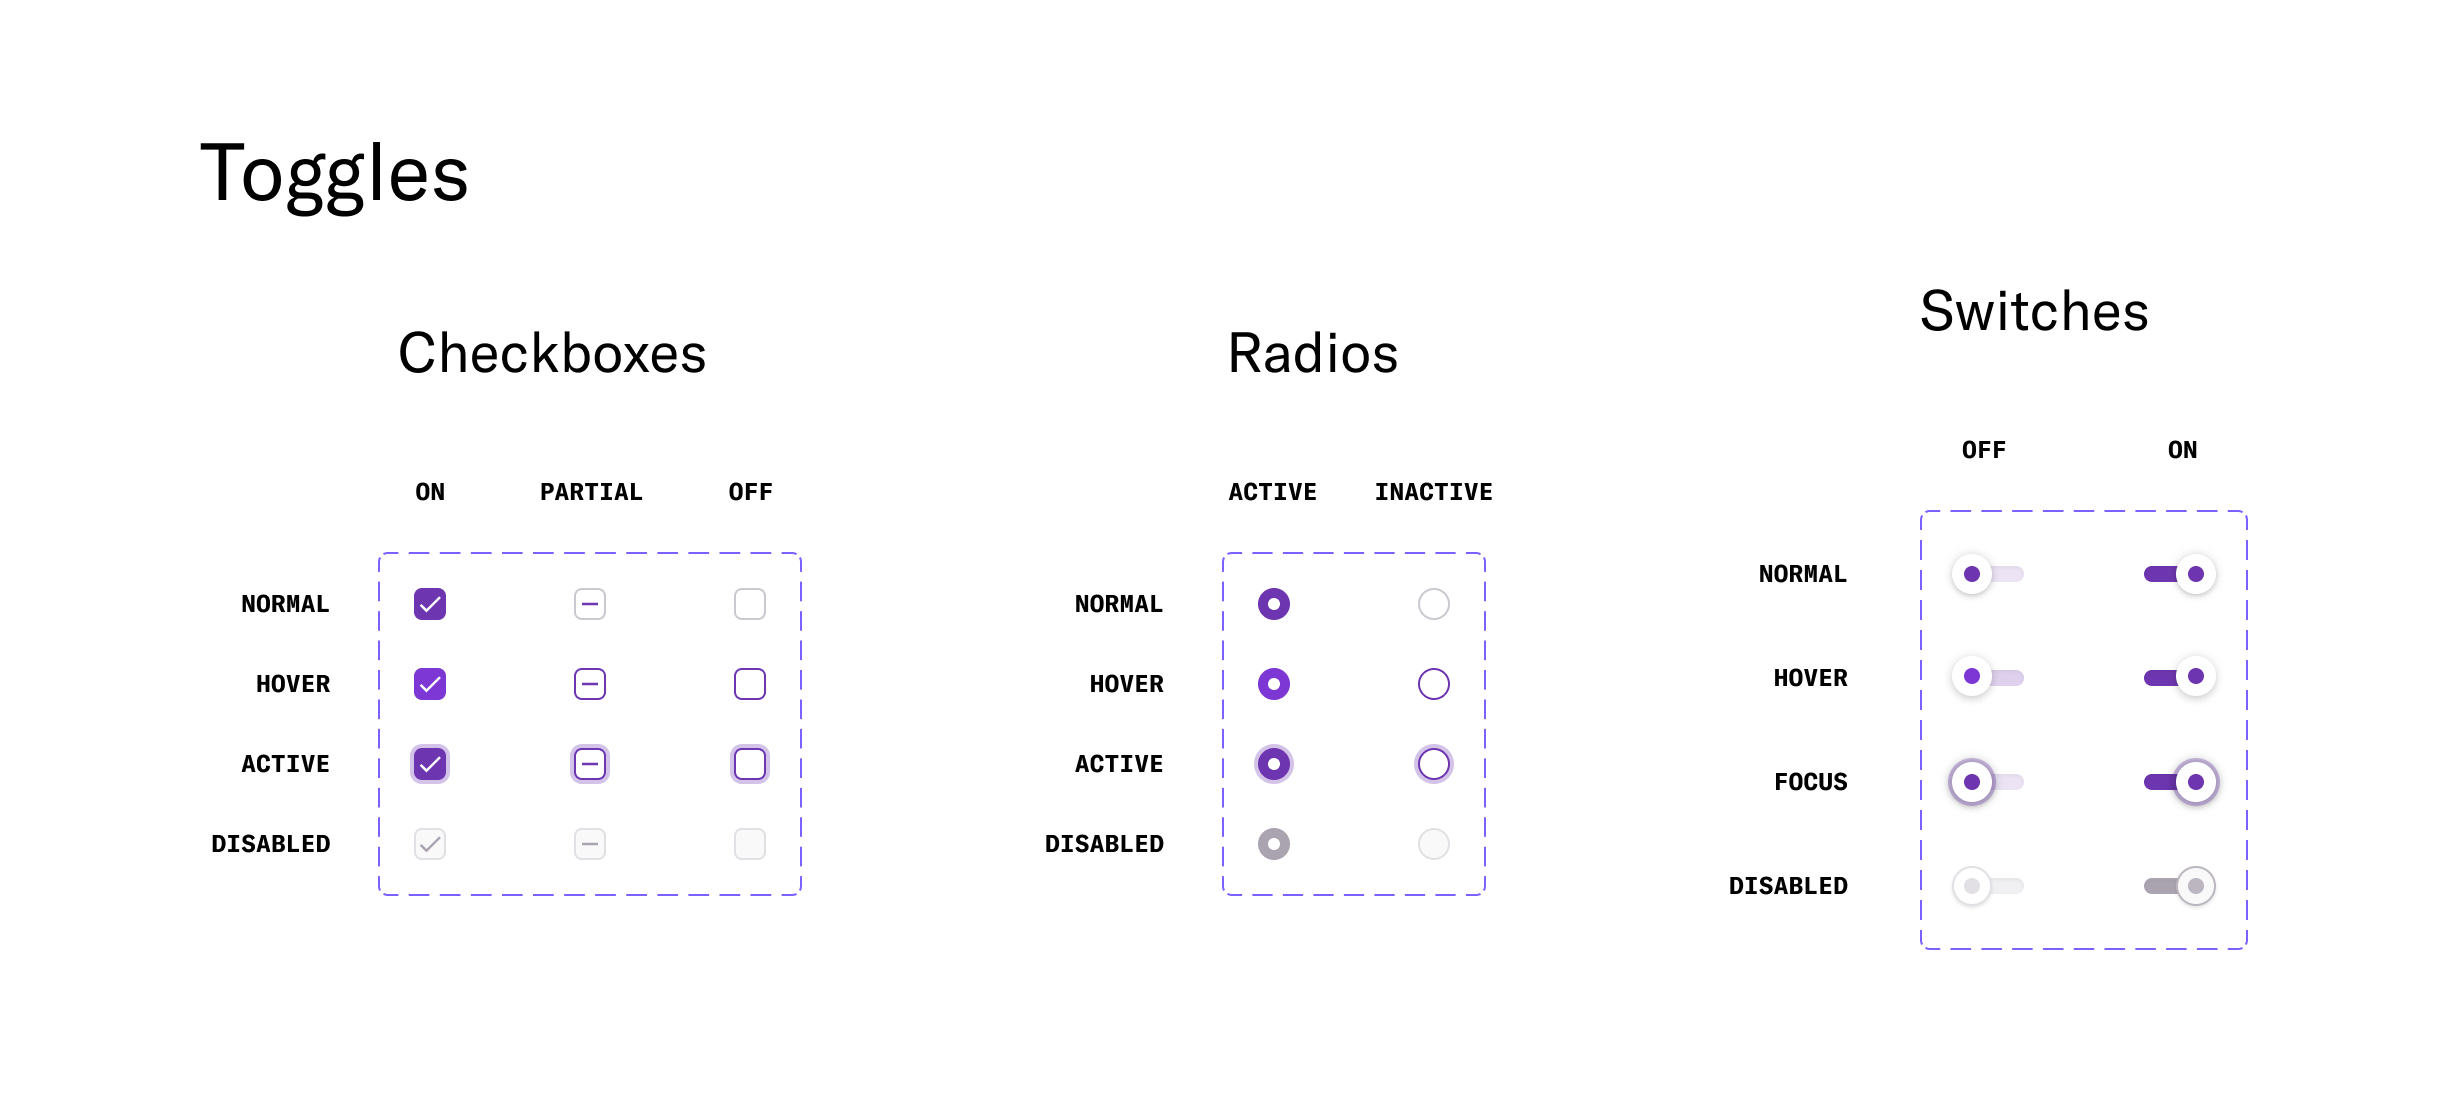 A screenshot of the UI kit showing three different types of toggles: checkbox, radio button, and switch. For each toggle type, the appearance is shown for multiple states such as on, off, hover, and disabled.